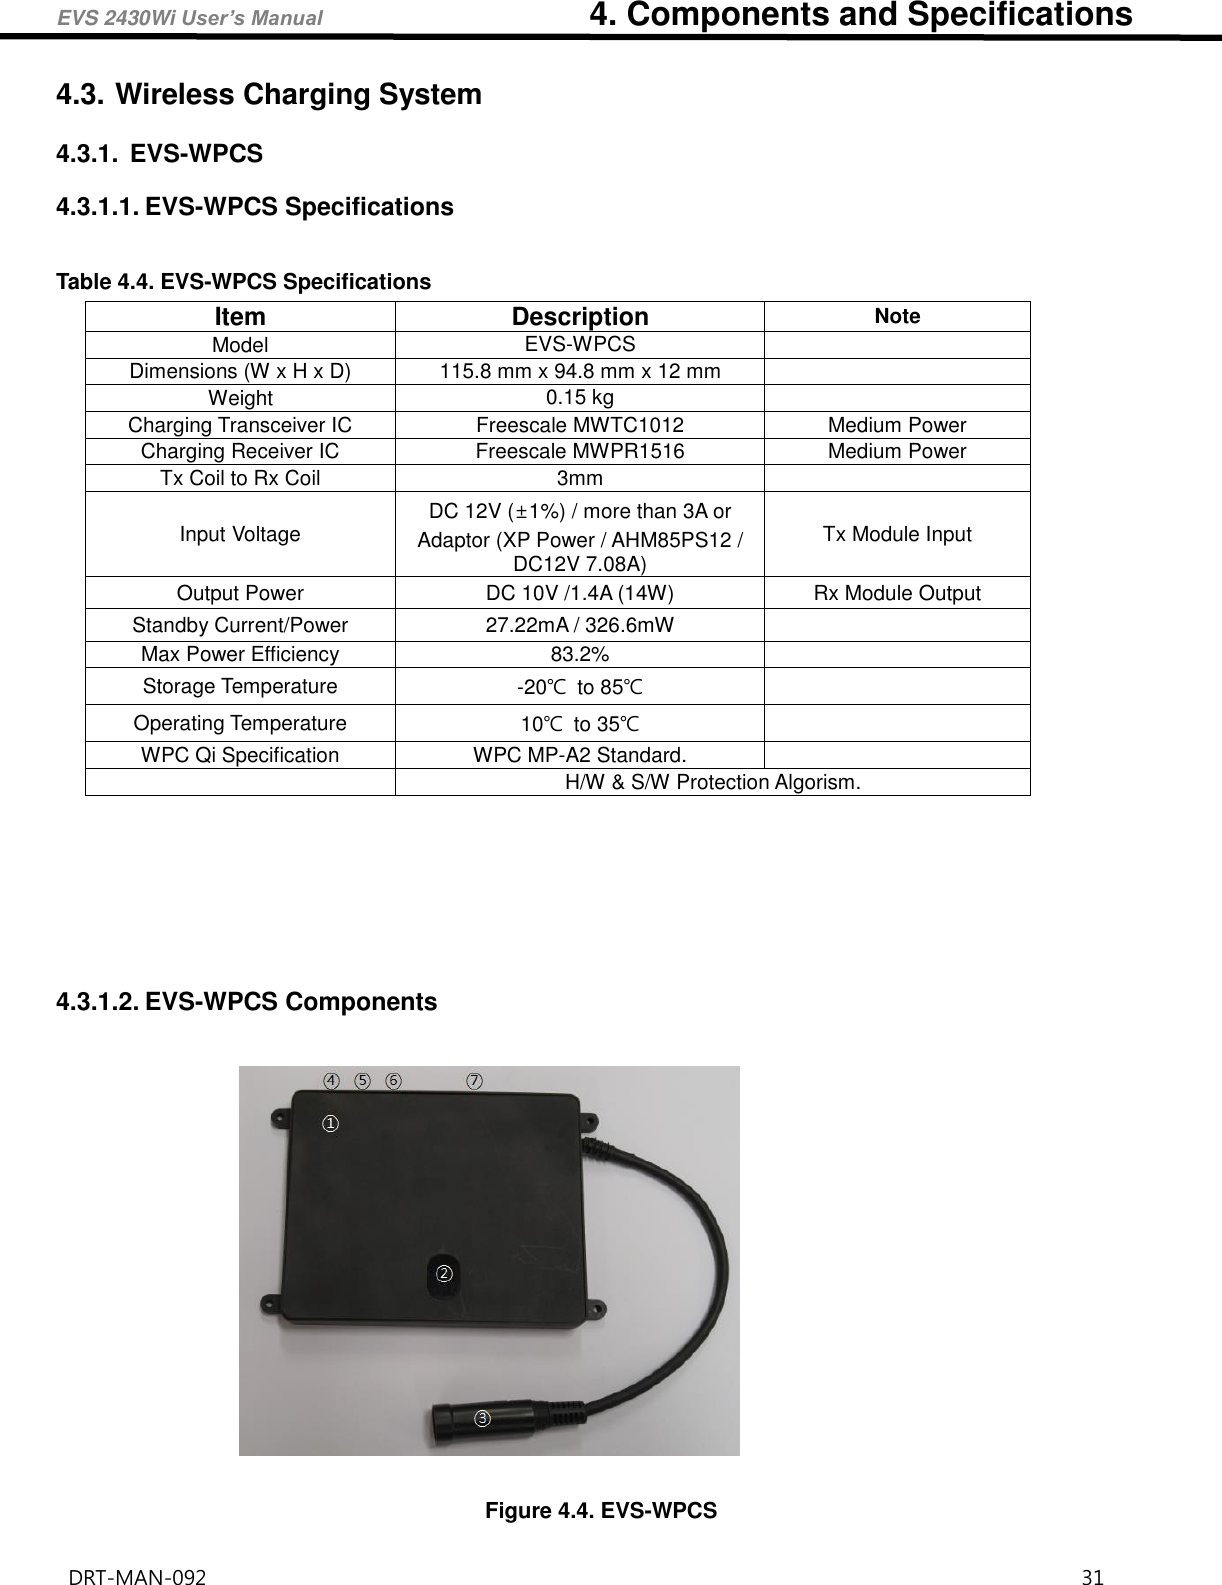 EVS 2430Wi User’s Manual                                4. Components and Specifications DRT-MAN-092                                                                                    31   4.3. Wireless Charging System 4.3.1.  EVS-WPCS 4.3.1.1. EVS-WPCS Specifications  Table 4.4. EVS-WPCS Specifications Item Description Note Model EVS-WPCS  Dimensions (W x H x D) 115.8 mm x 94.8 mm x 12 mm  Weight 0.15 kg  Charging Transceiver IC Freescale MWTC1012 Medium Power Charging Receiver IC Freescale MWPR1516 Medium Power Tx Coil to Rx Coil 3mm  Input Voltage DC 12V (±1%) / more than 3A or Adaptor (XP Power / AHM85PS12 / DC12V 7.08A) Tx Module Input Output Power DC 10V /1.4A (14W) Rx Module Output Standby Current/Power 27.22mA / 326.6mW  Max Power Efficiency 83.2%  Storage Temperature -20℃ to 85℃  Operating Temperature 10℃ to 35℃  WPC Qi Specification WPC MP-A2 Standard.   H/W &amp; S/W Protection Algorism.         4.3.1.2. EVS-WPCS Components   Figure 4.4. EVS-WPCS 